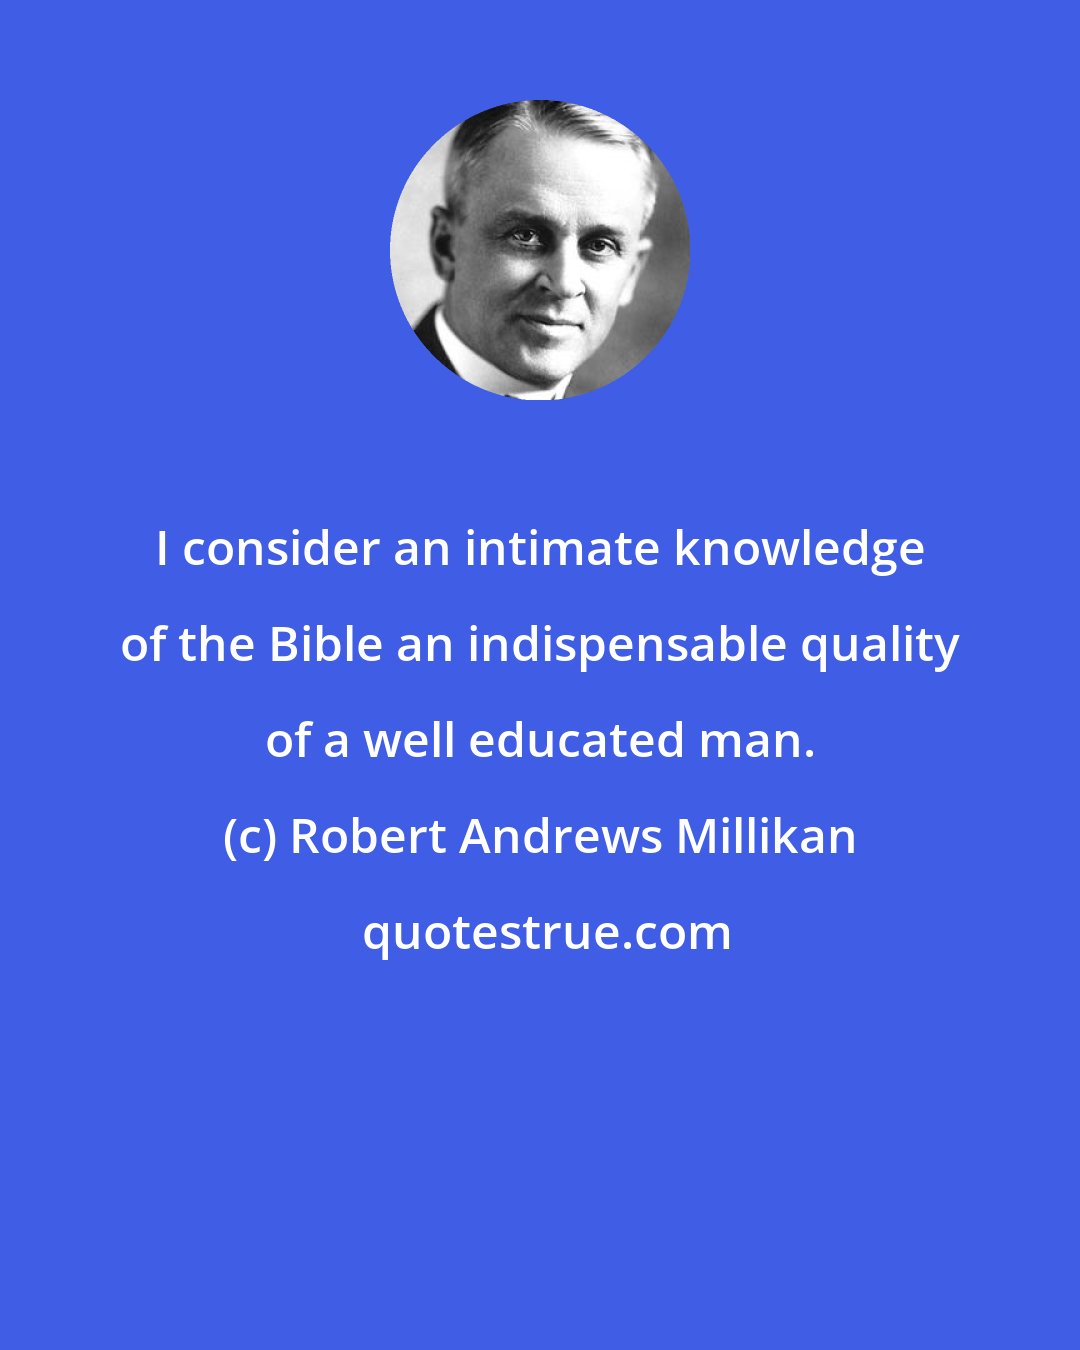 Robert Andrews Millikan: I consider an intimate knowledge of the Bible an indispensable quality of a well educated man.